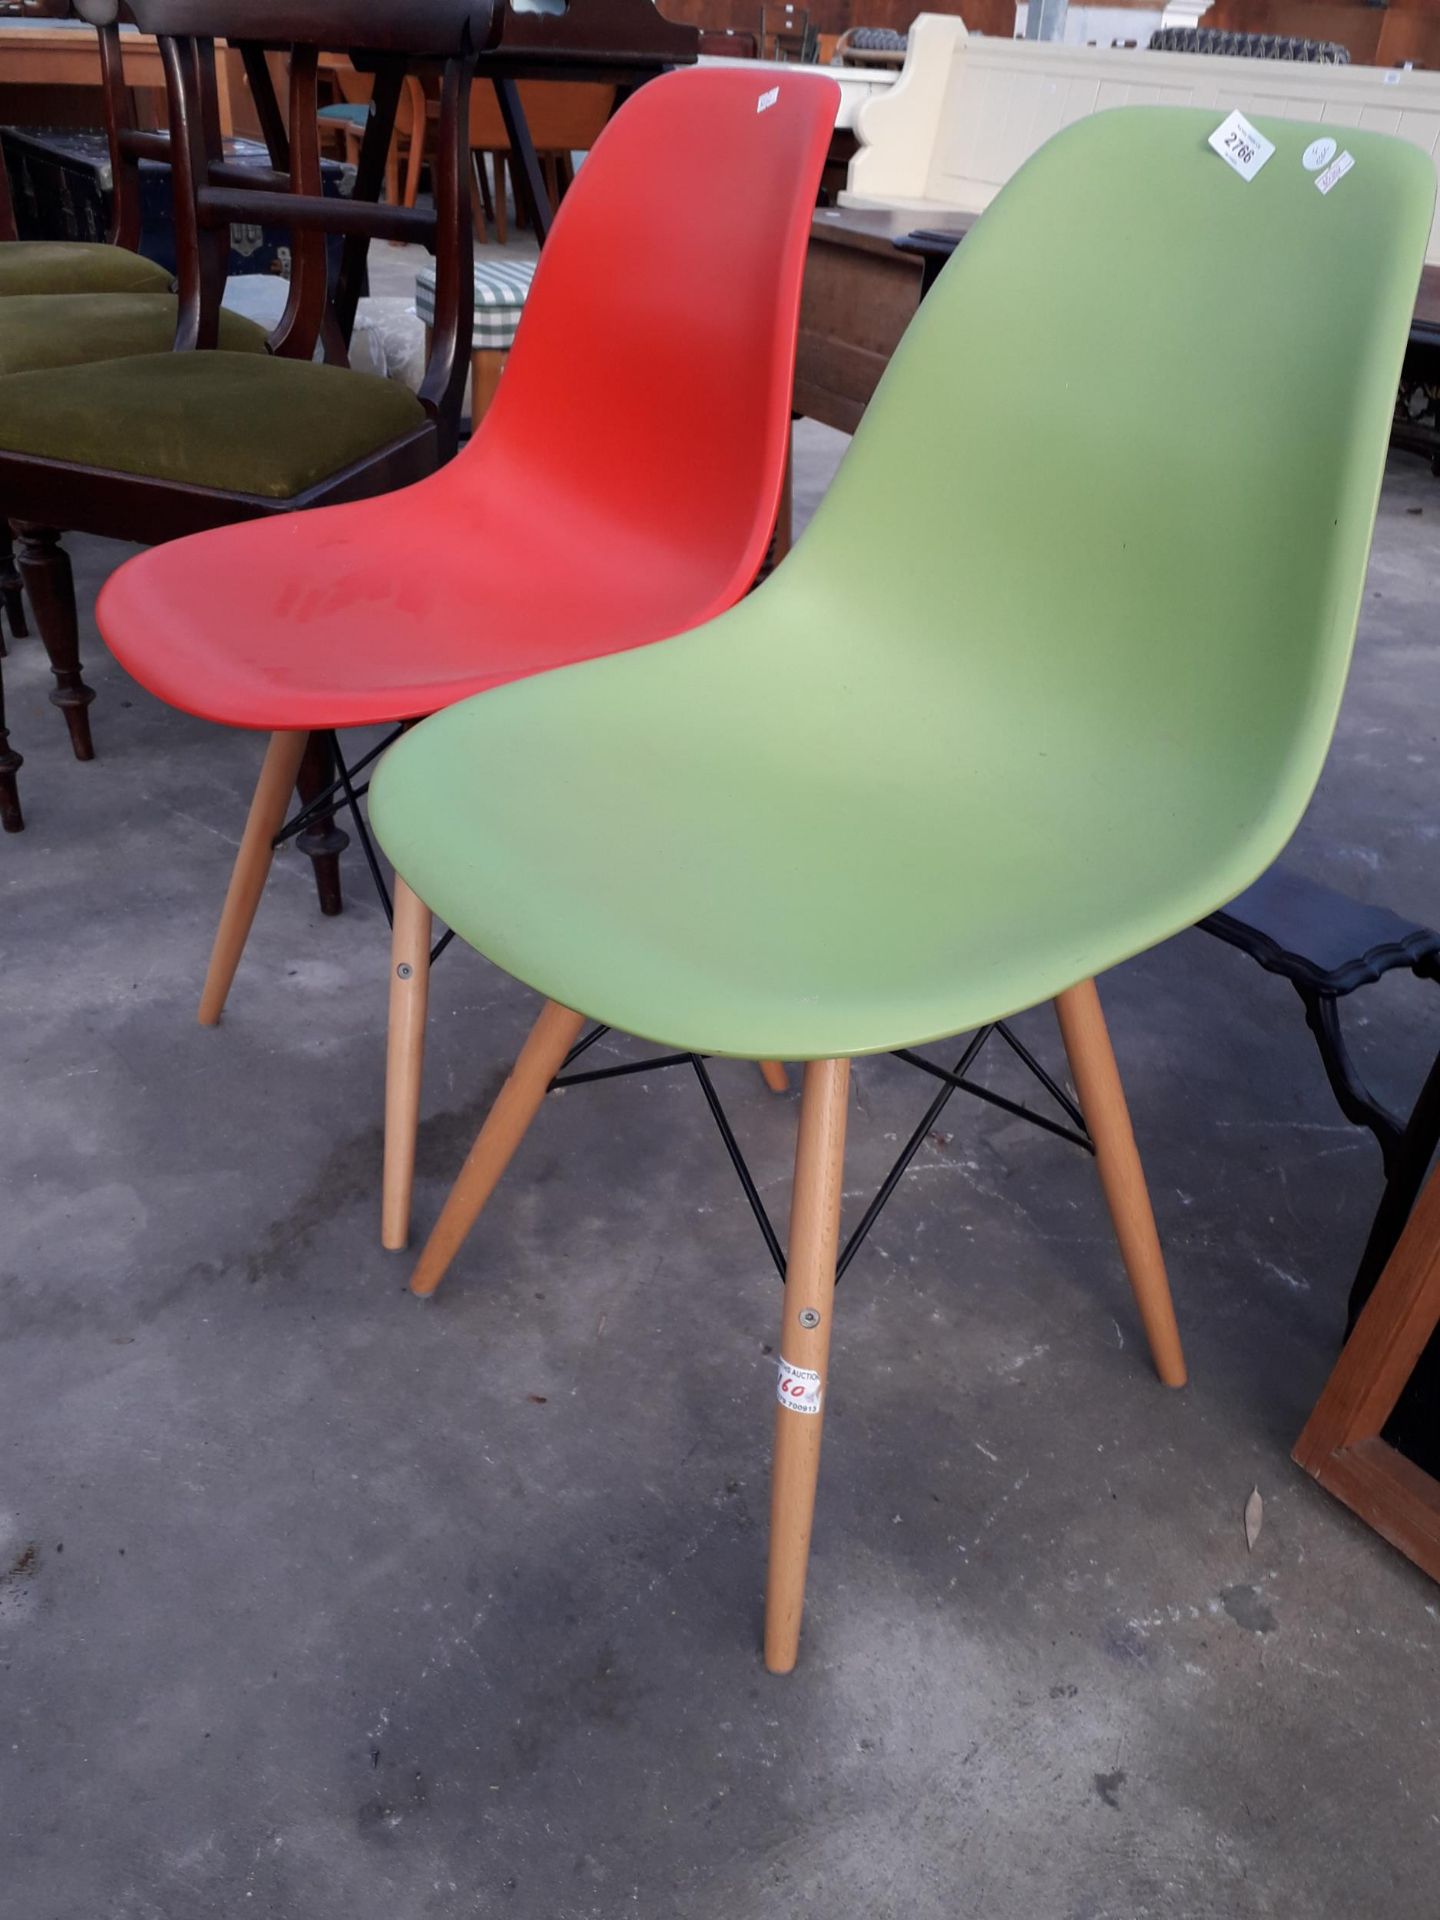 PAIR OF MODERN DESIGN RETRO PLASTIC DINING CHAIRS - Image 2 of 2